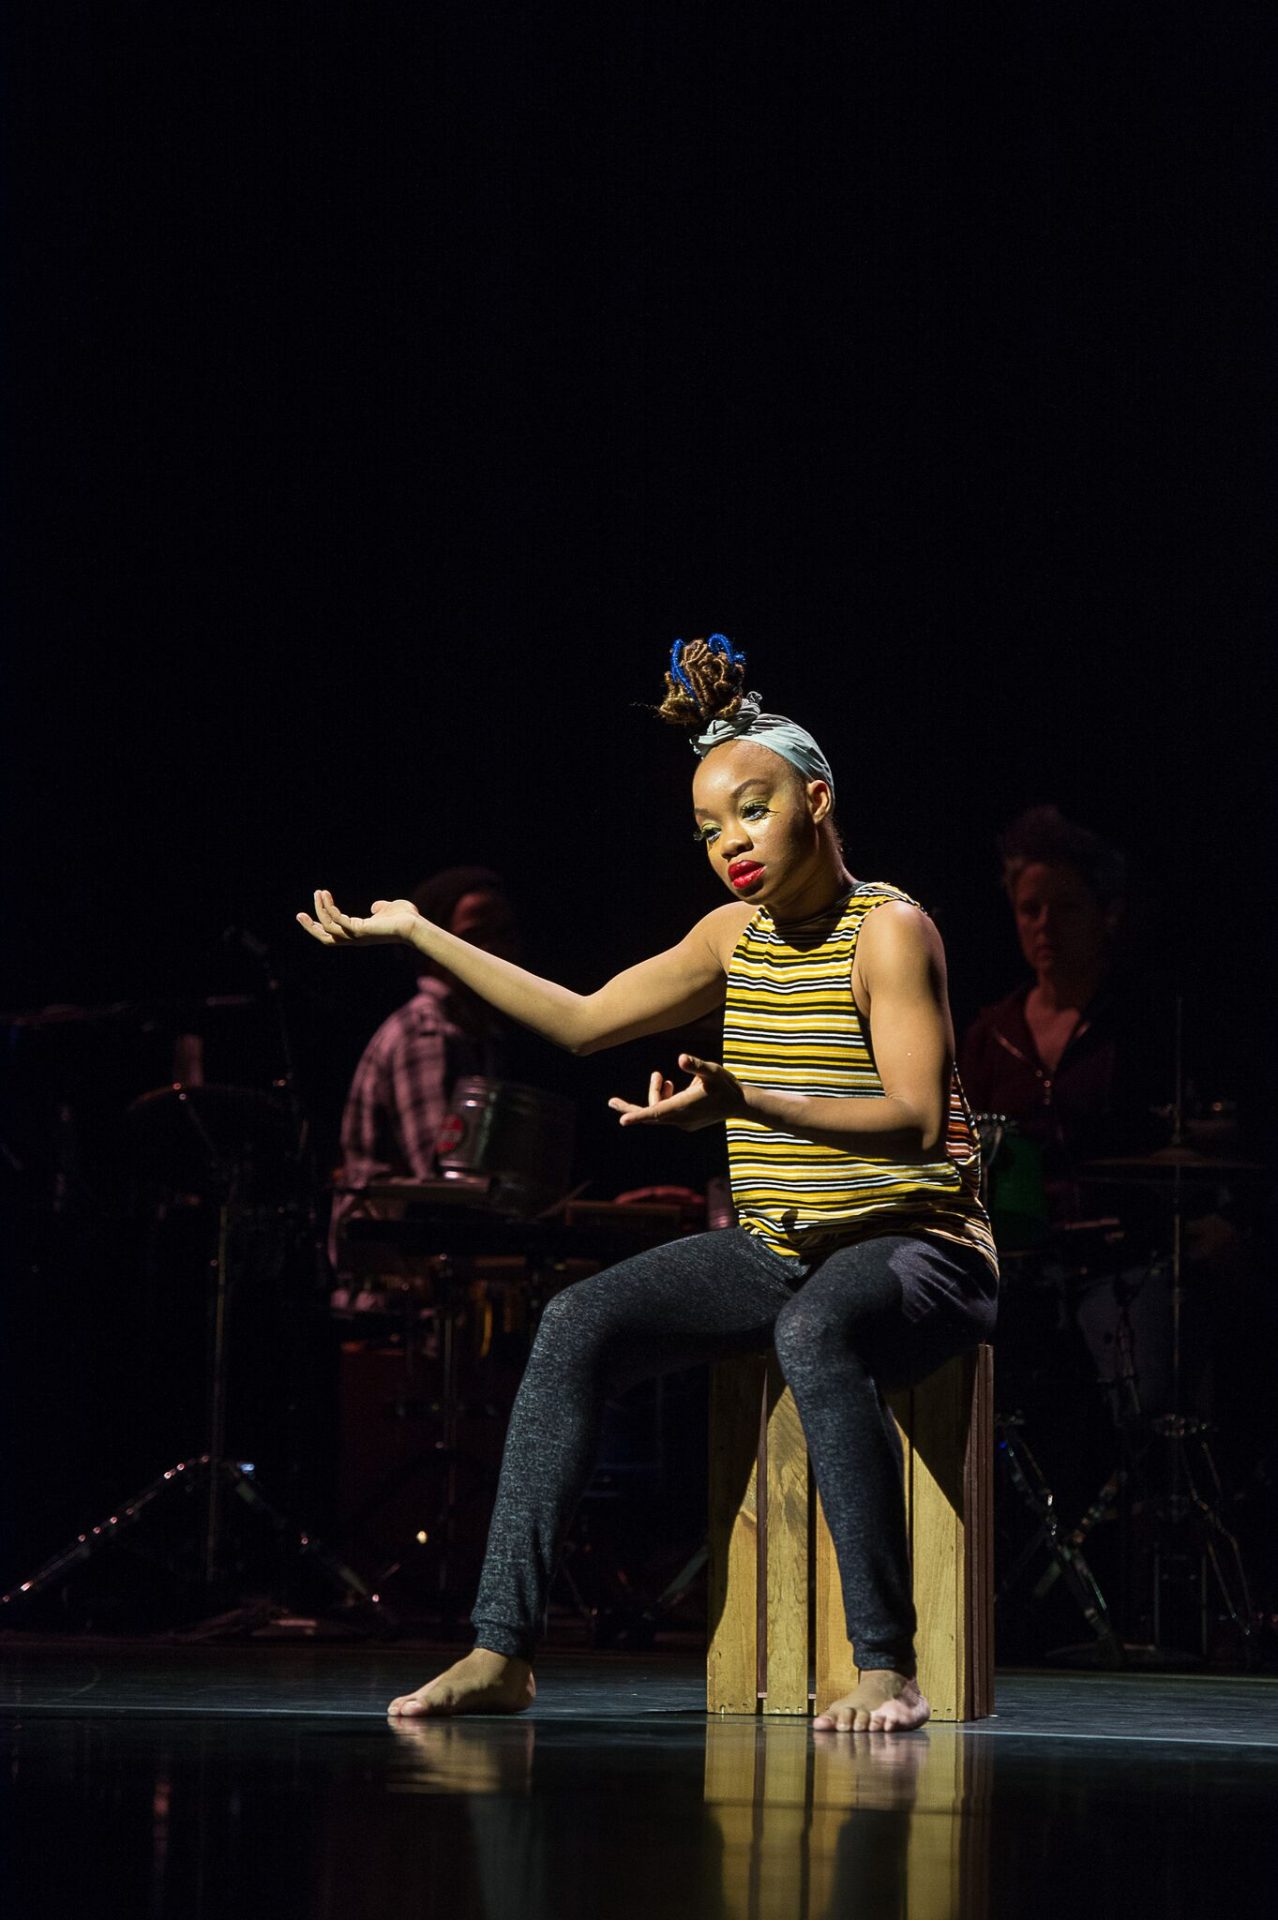 Choreographer Camille A. Brown on her journey and current work with John Legend